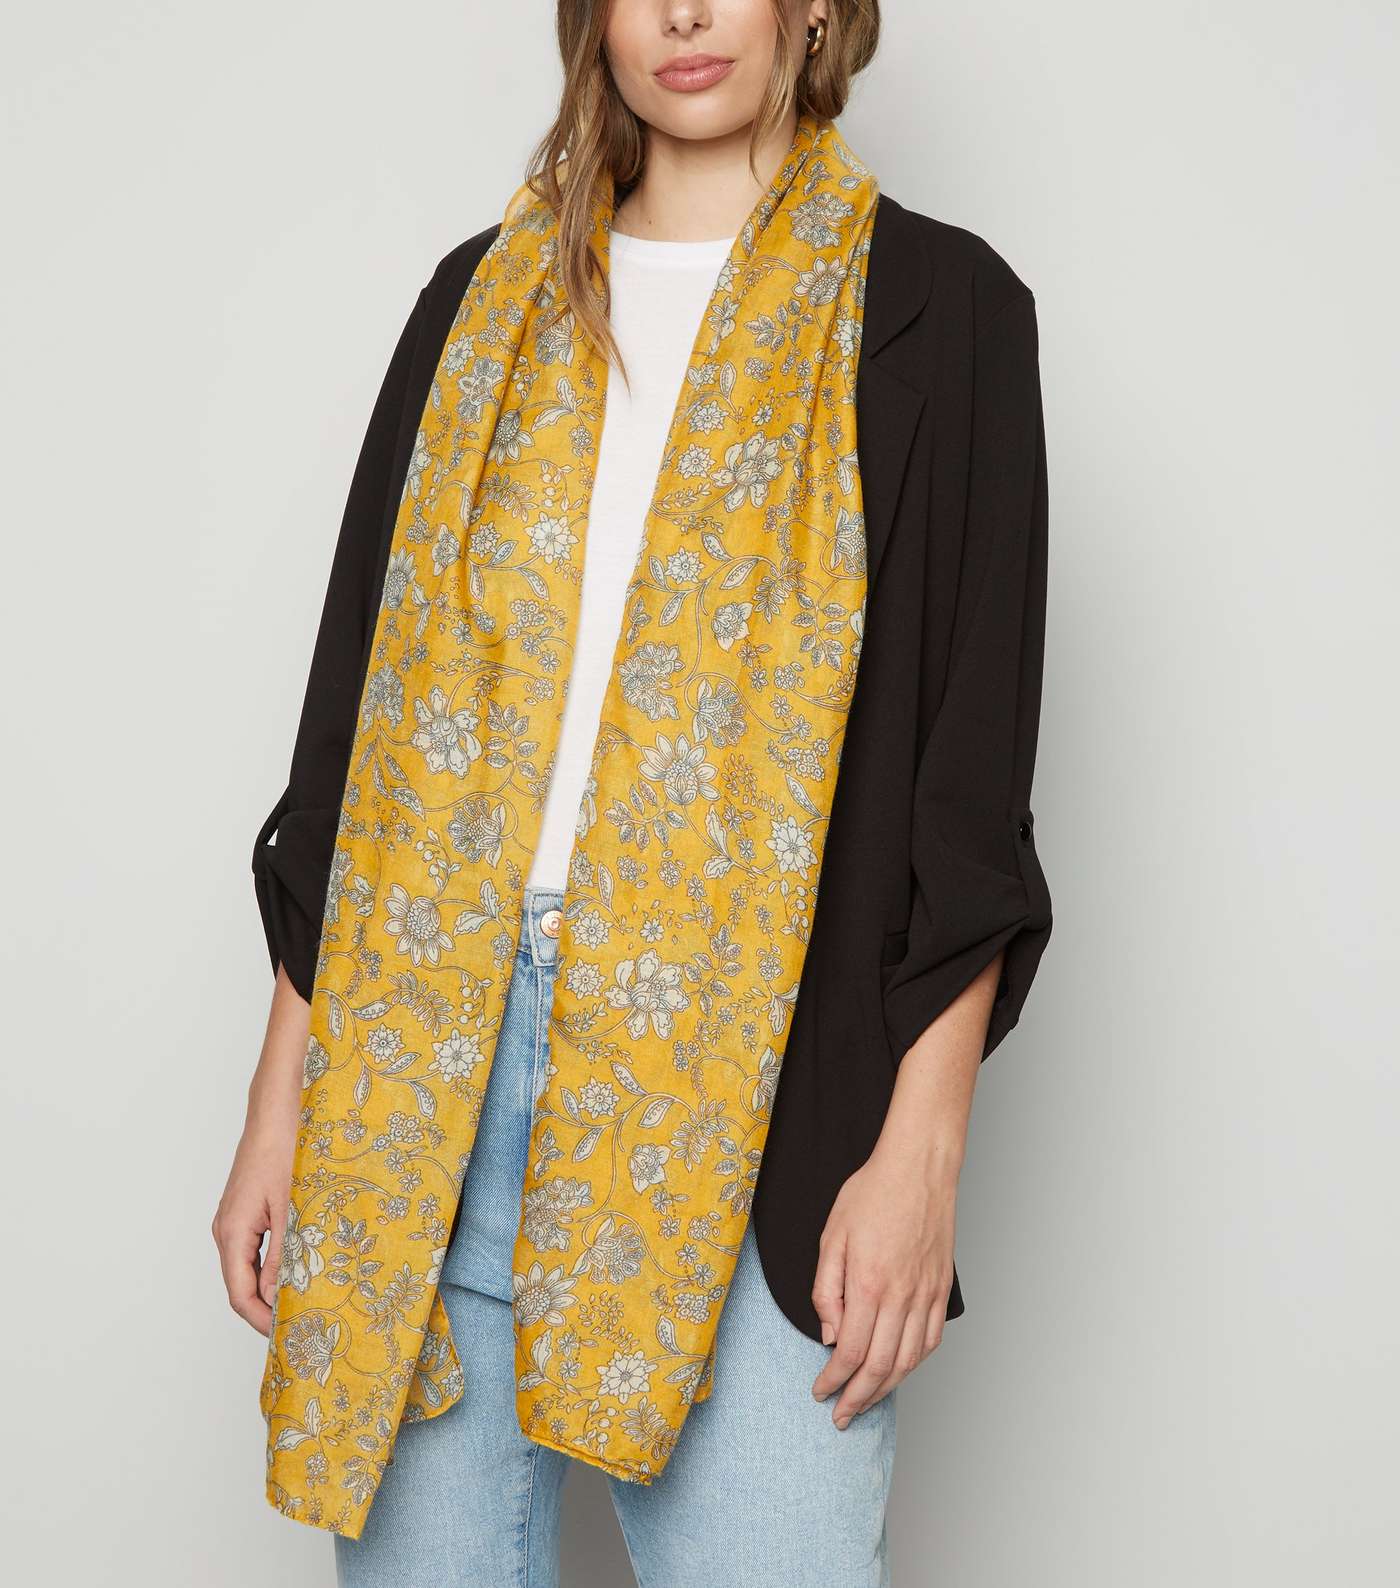 Yellow Floral Print Lightweight Woven Scarf Image 2